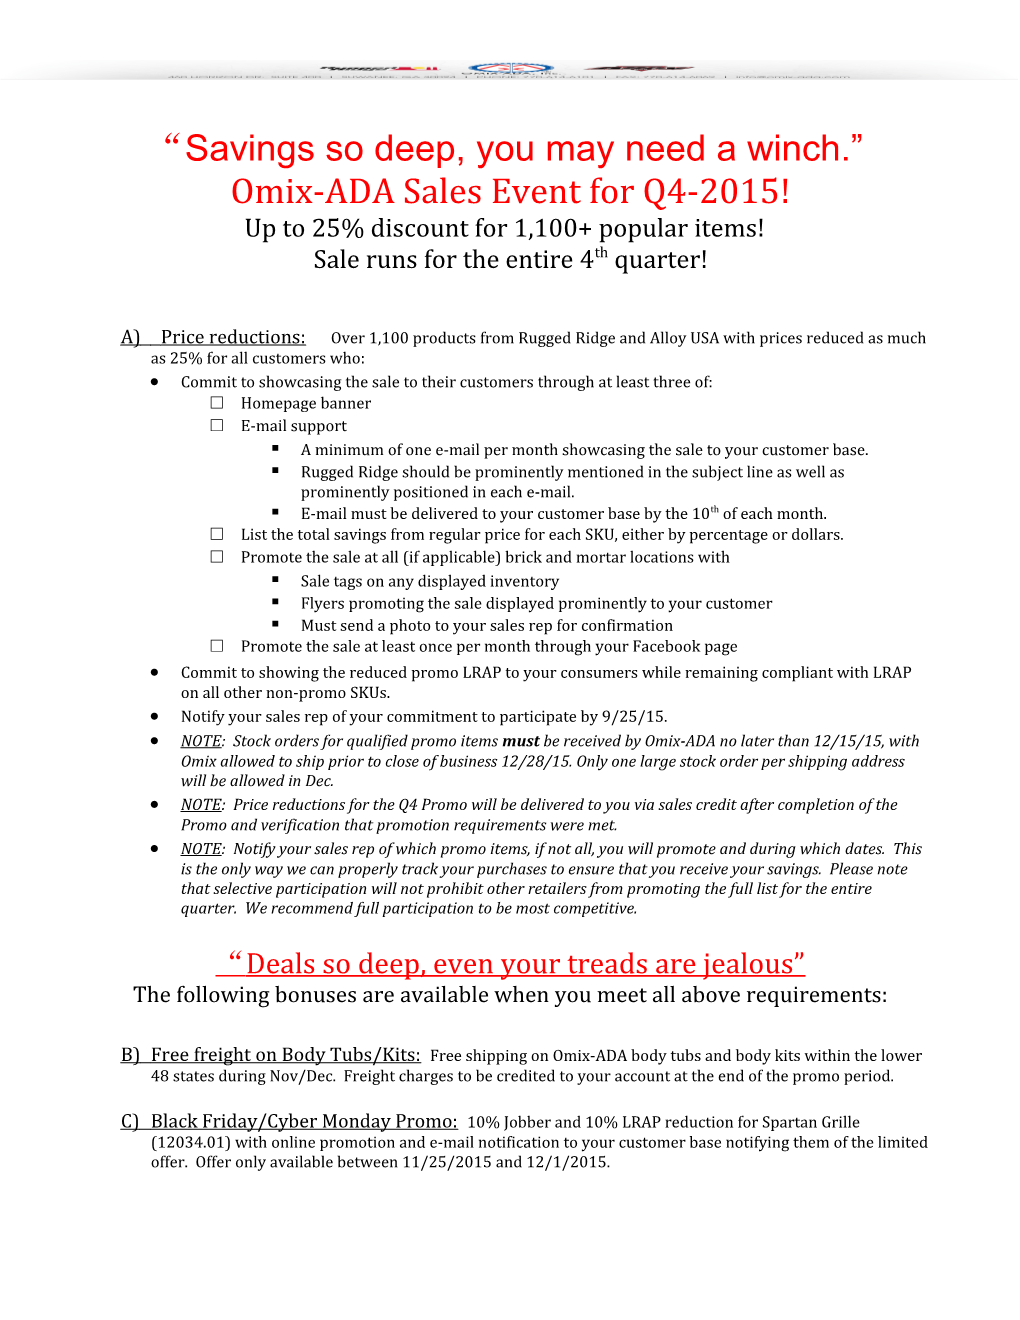 Omix-ADA Sales Event for Q4-2015!